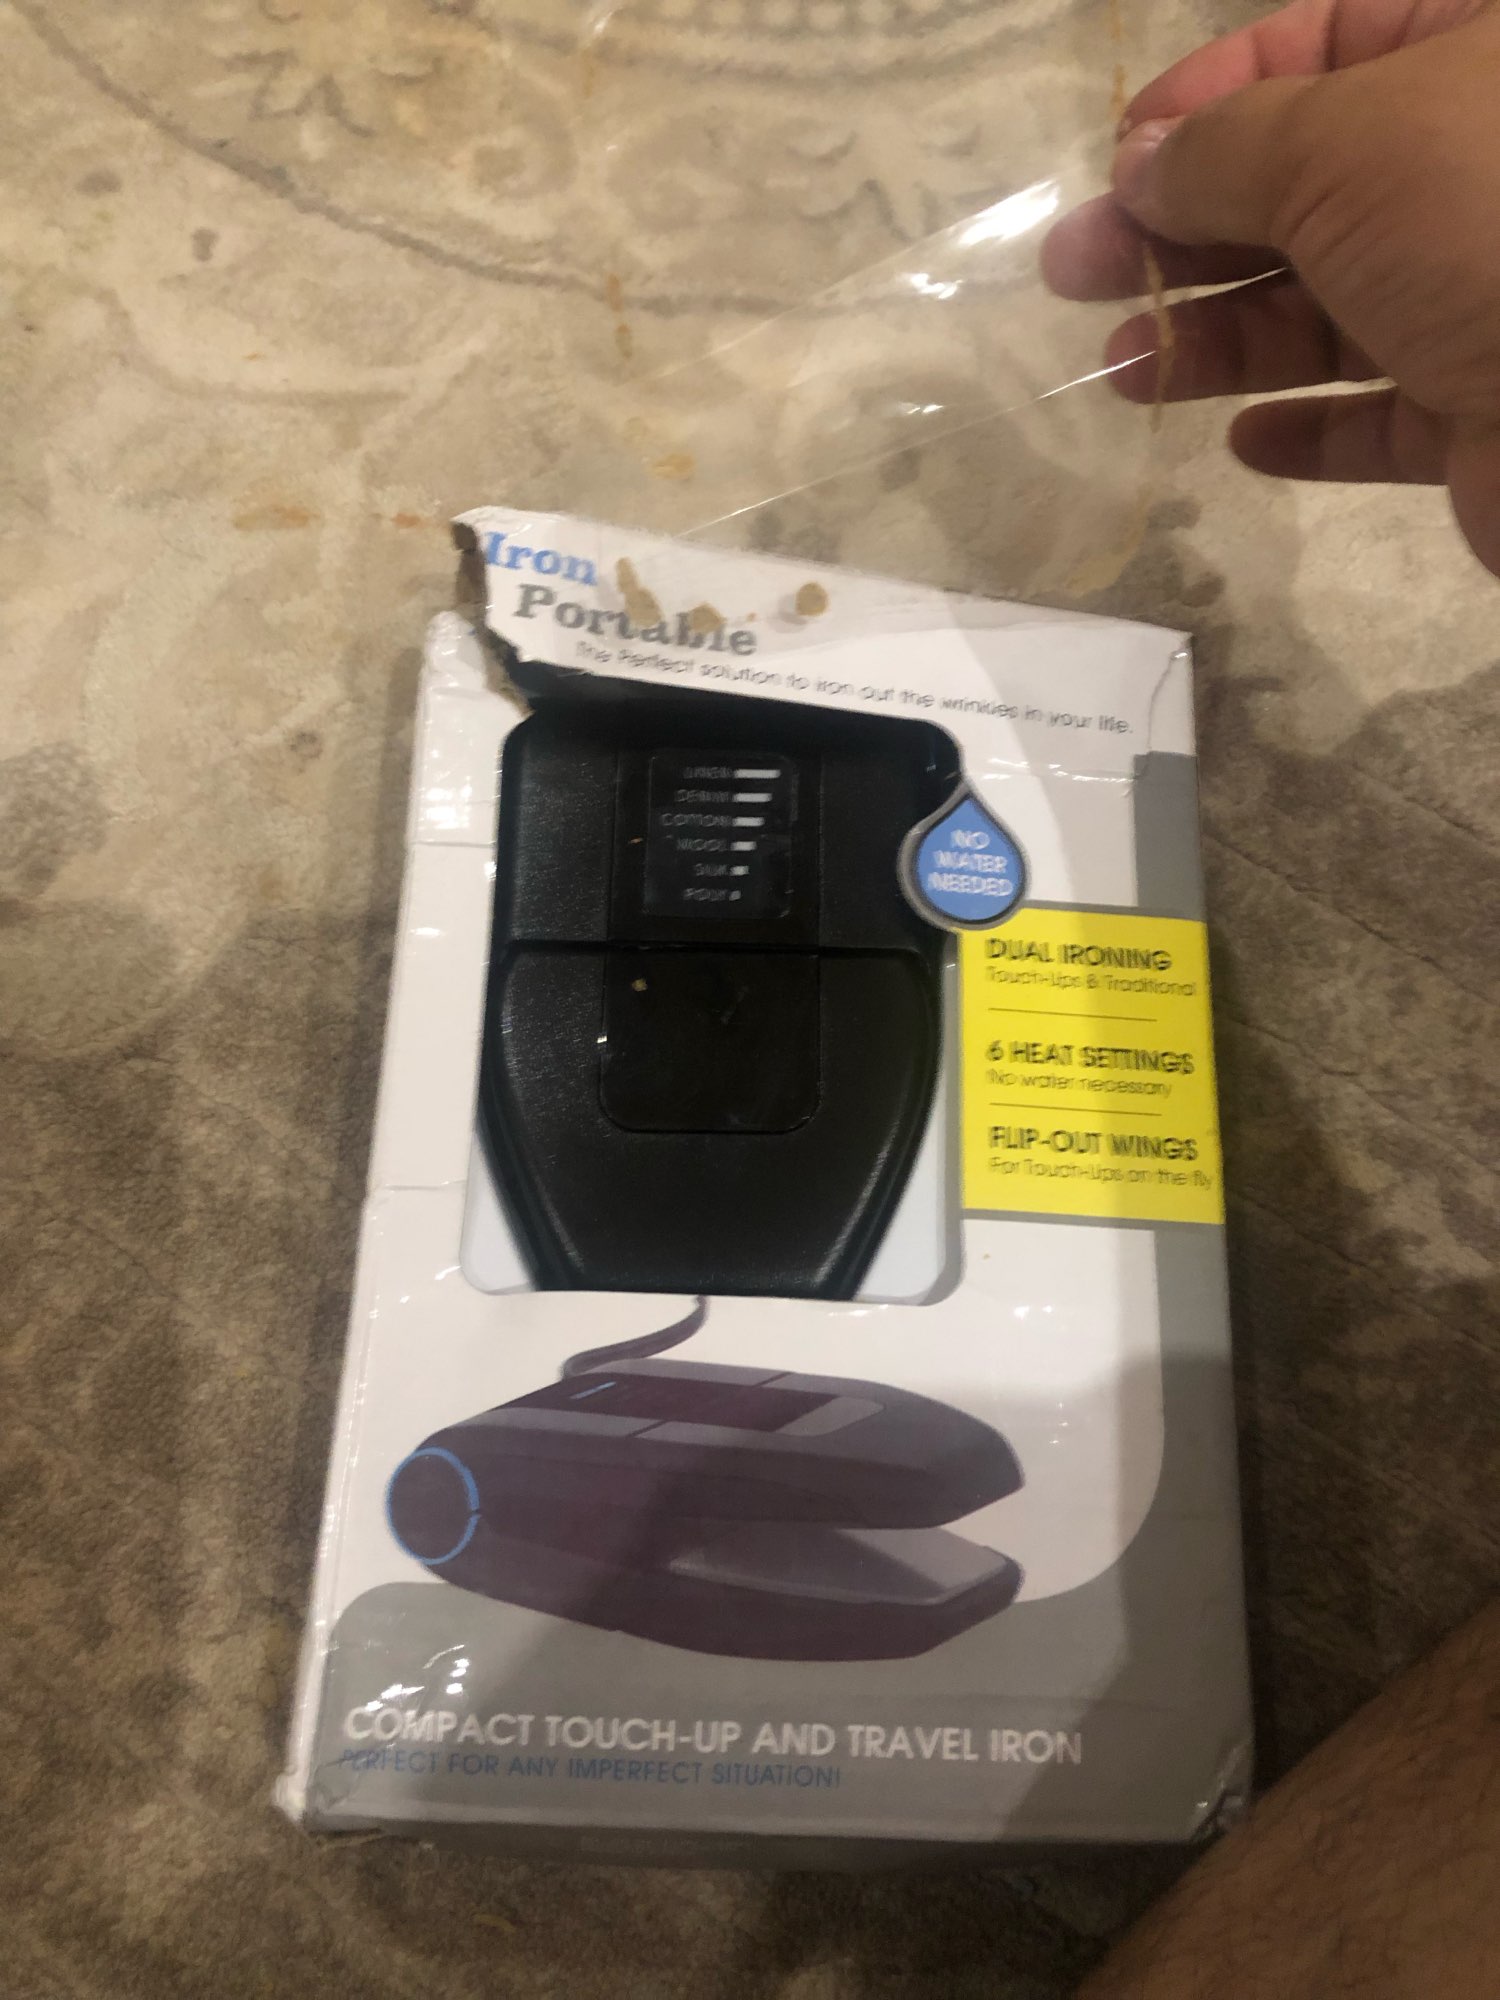 Folding Portable Iron Compact Touch-Up Mini Travel Iron photo review